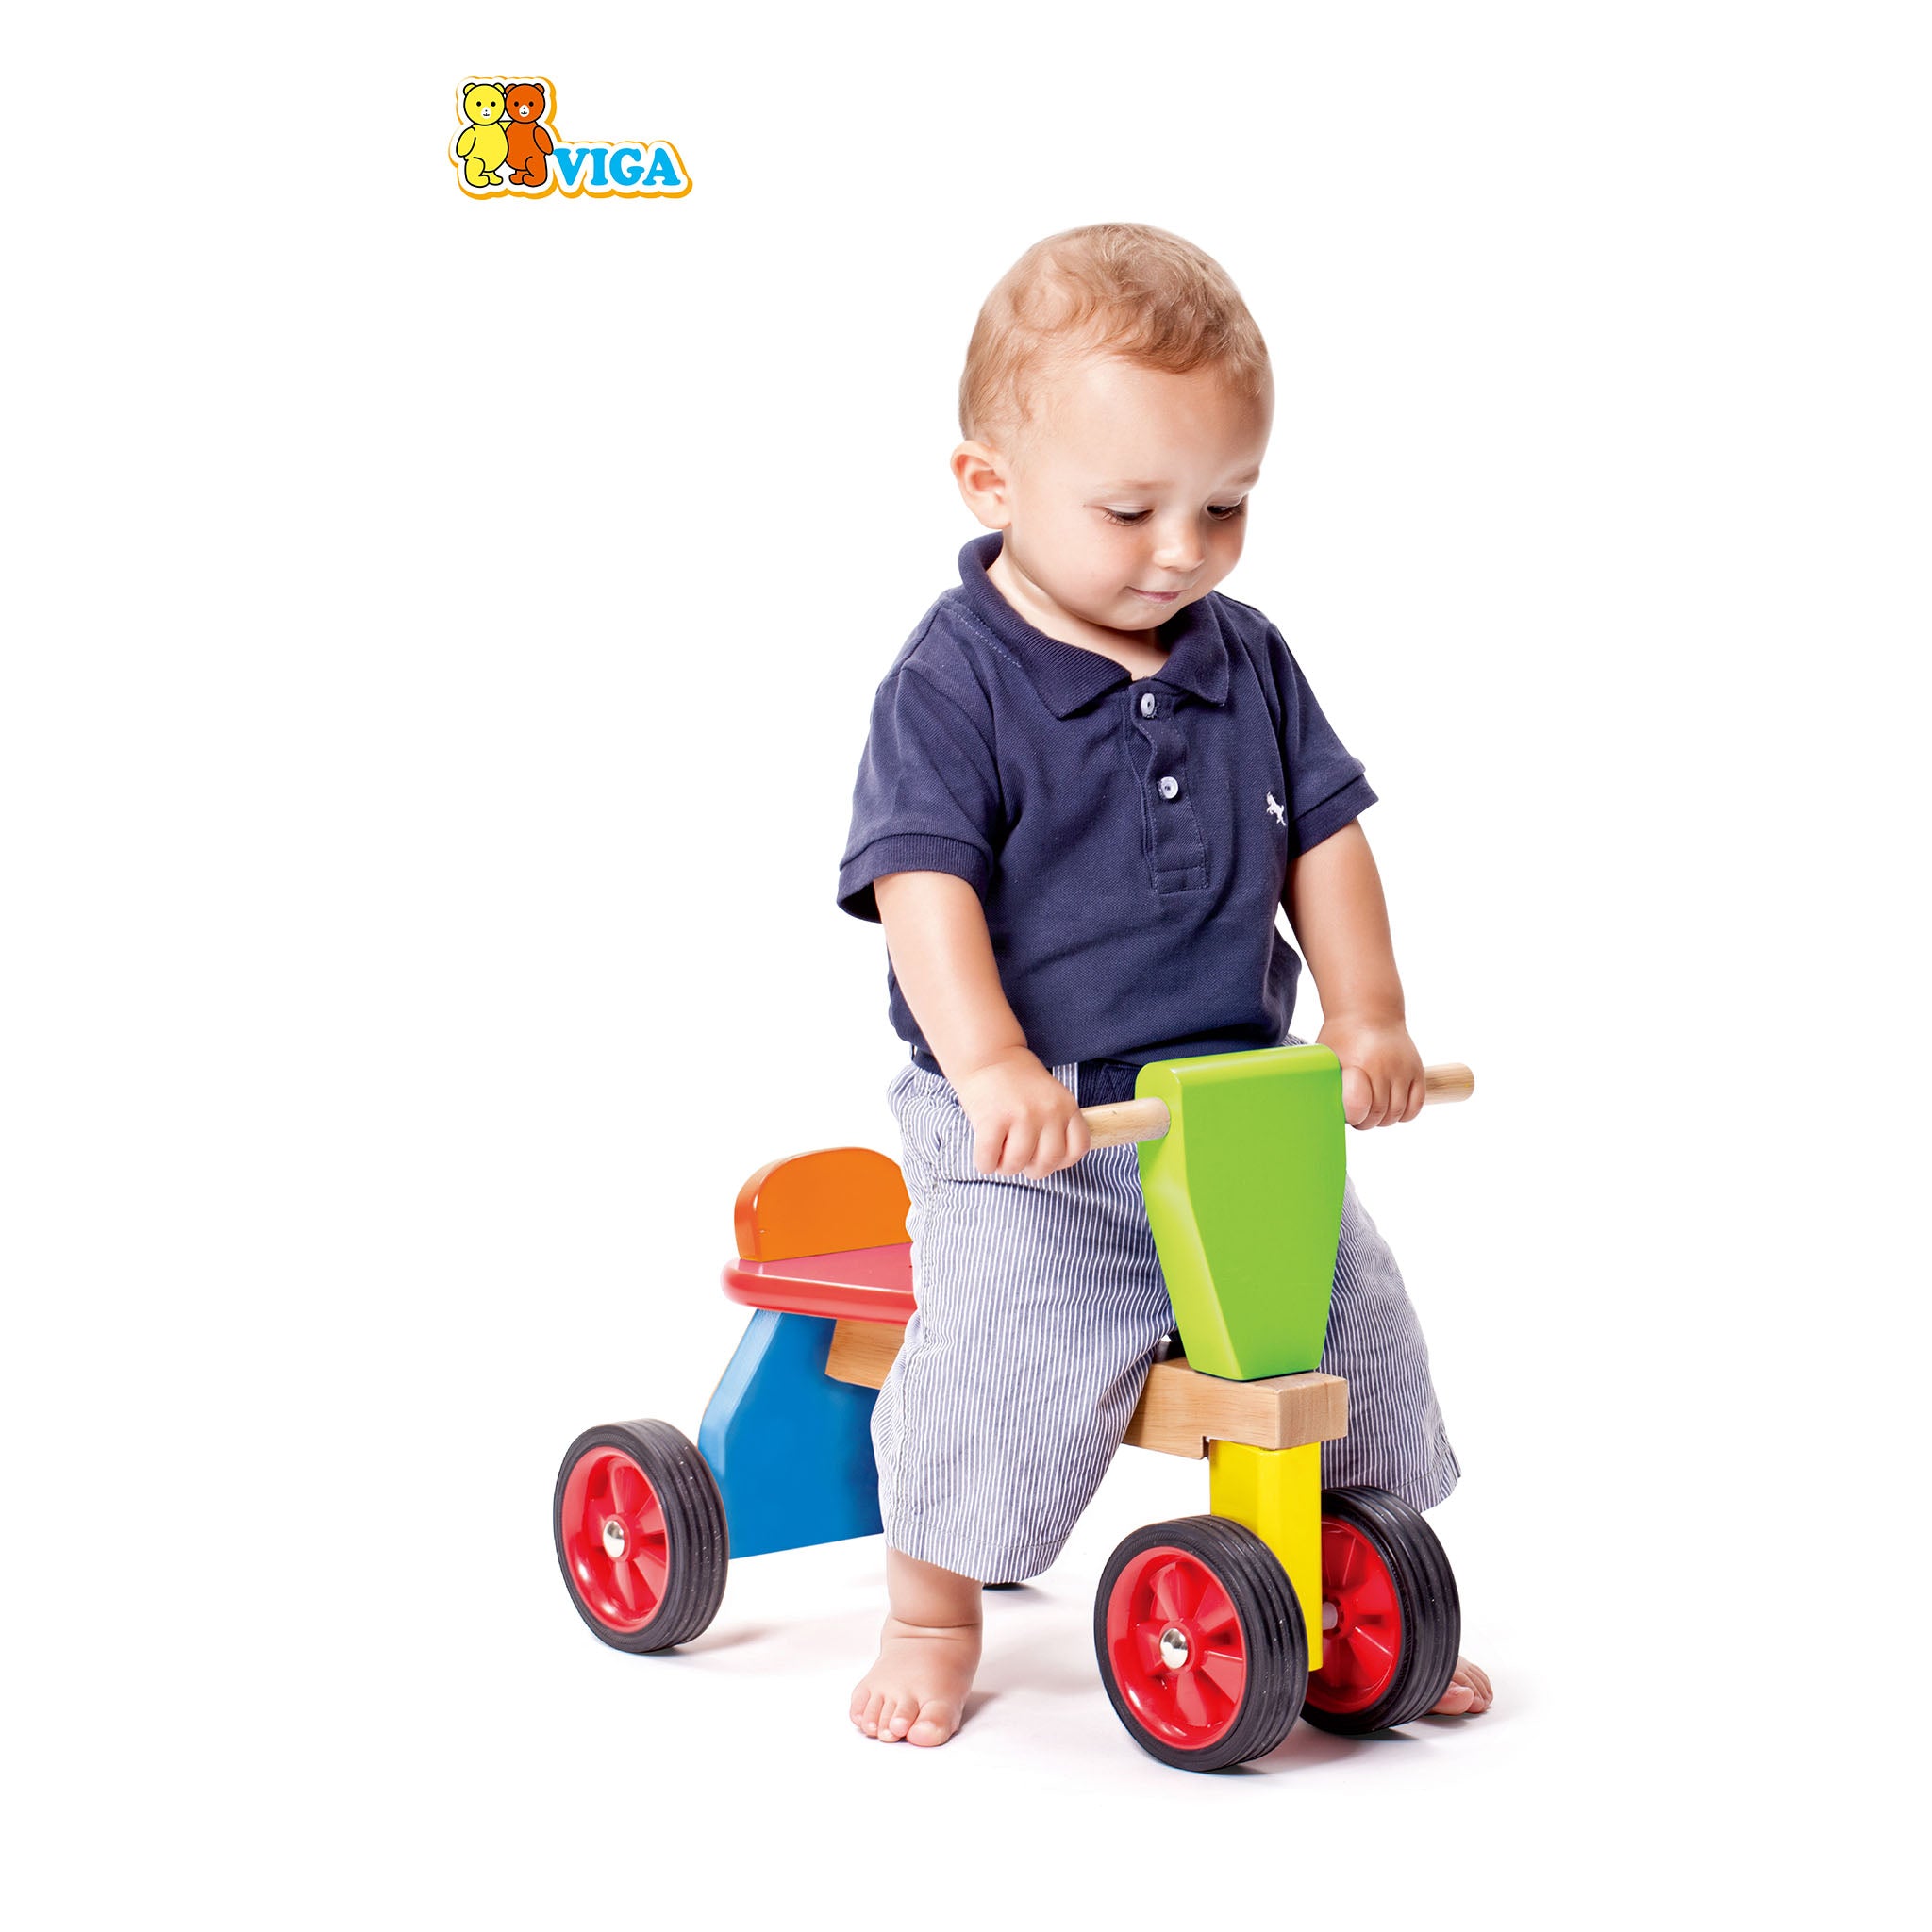 Tiny Trike: Discover the Joy of Riding for Little Ones